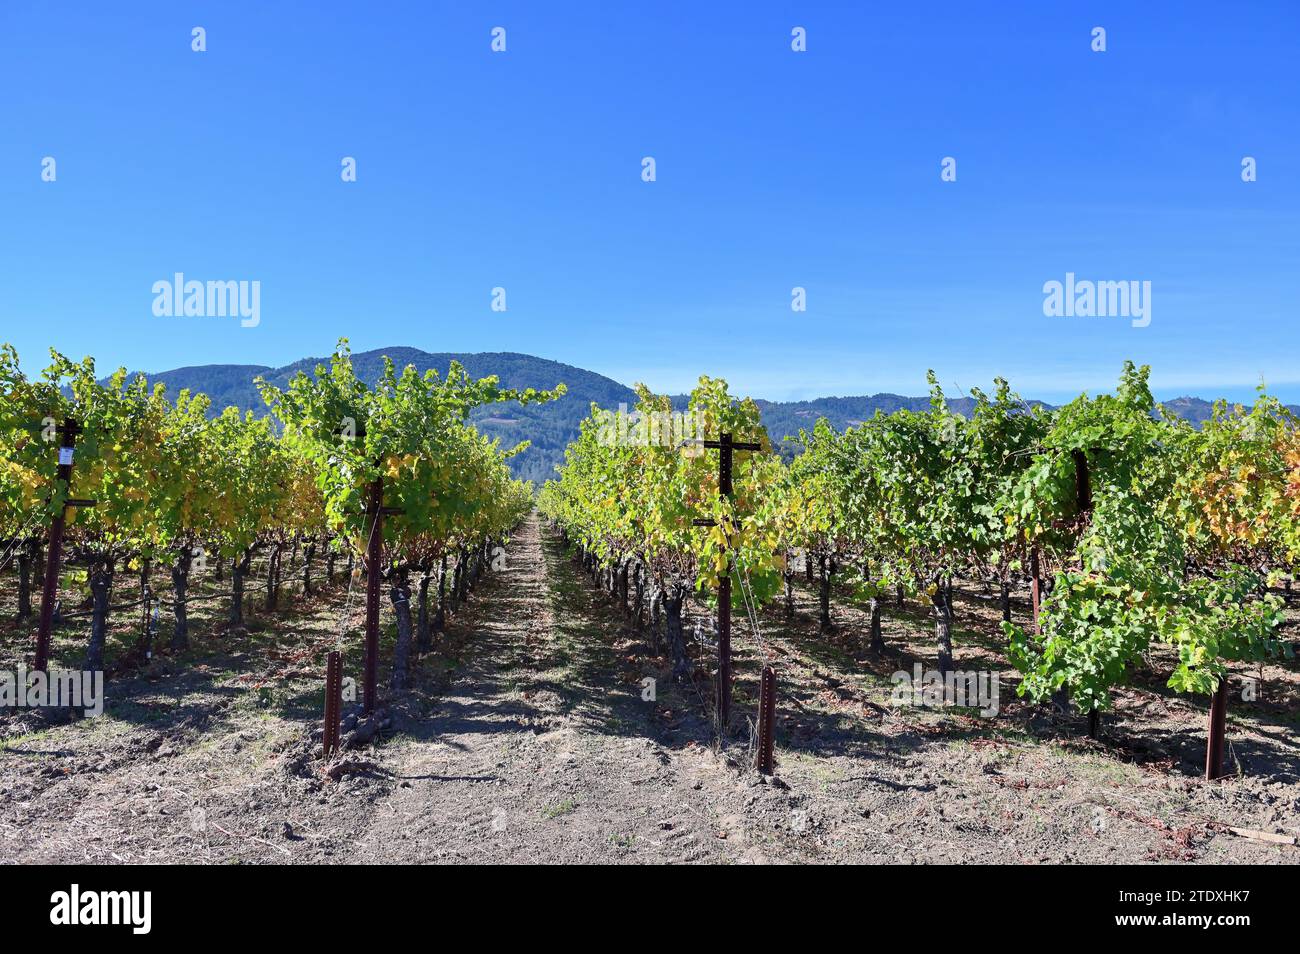 Rutherford, California, USA. Vines revealing the early tints of autumn fill the landscape in Napa Valley. Stock Photo